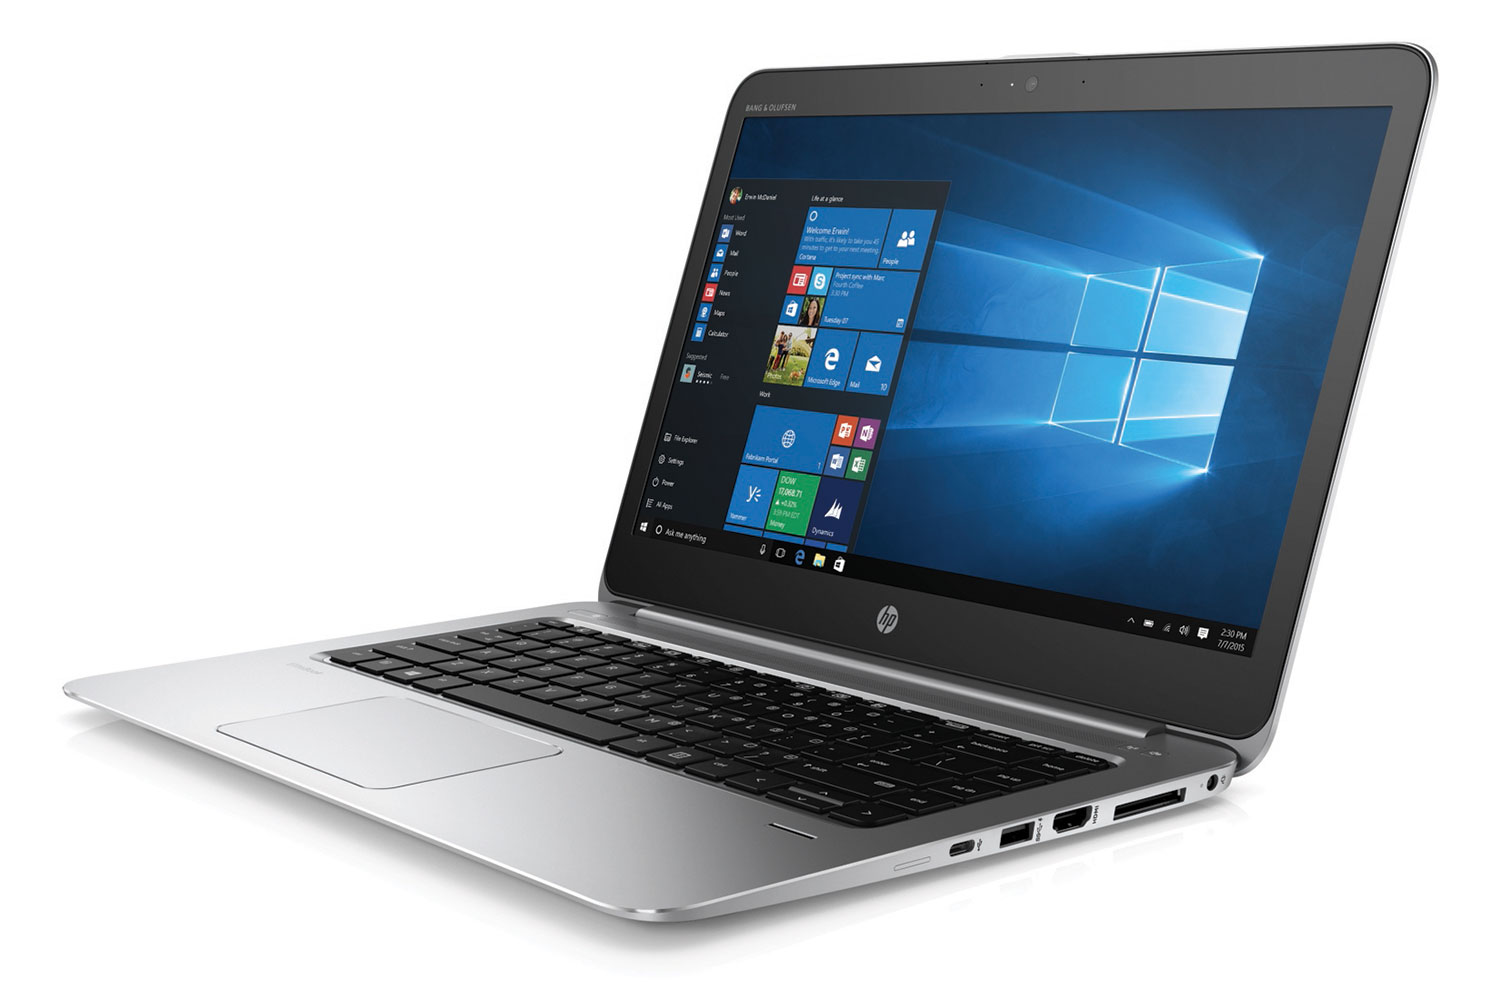 hps new elitebook folio is a half inch thick laptop with 4k display hp 1040 g3 hp20150916652